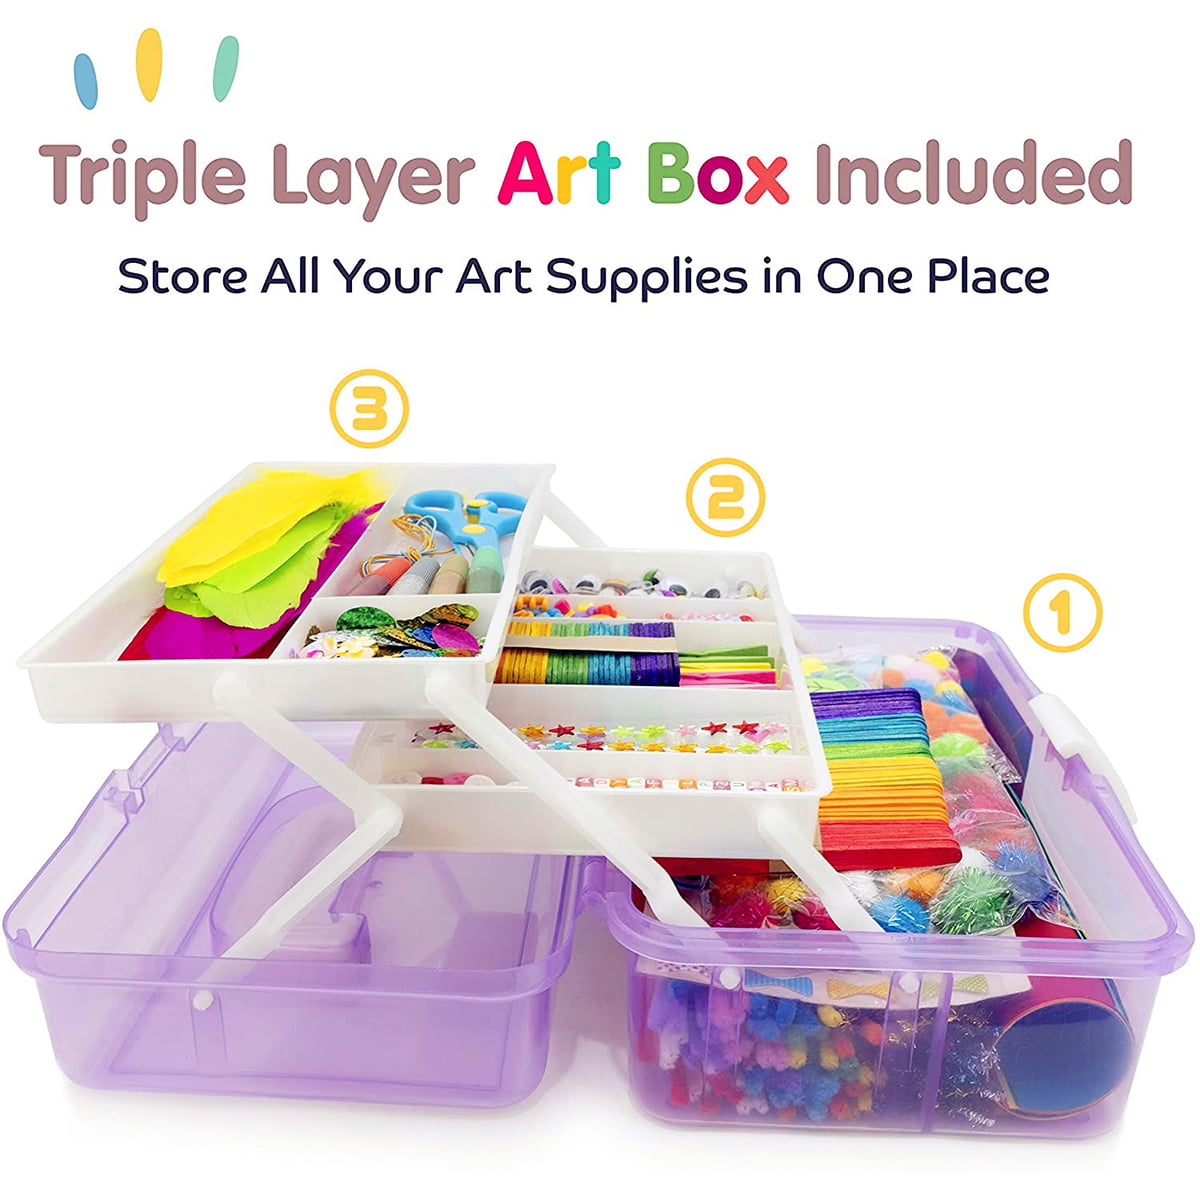 Darice Arts and Crafts Kit - 1000+ Piece Kids Craft Supplies & Materials, Art Supplies Box for Girls & Boys Age 4 5 6 7 8 9